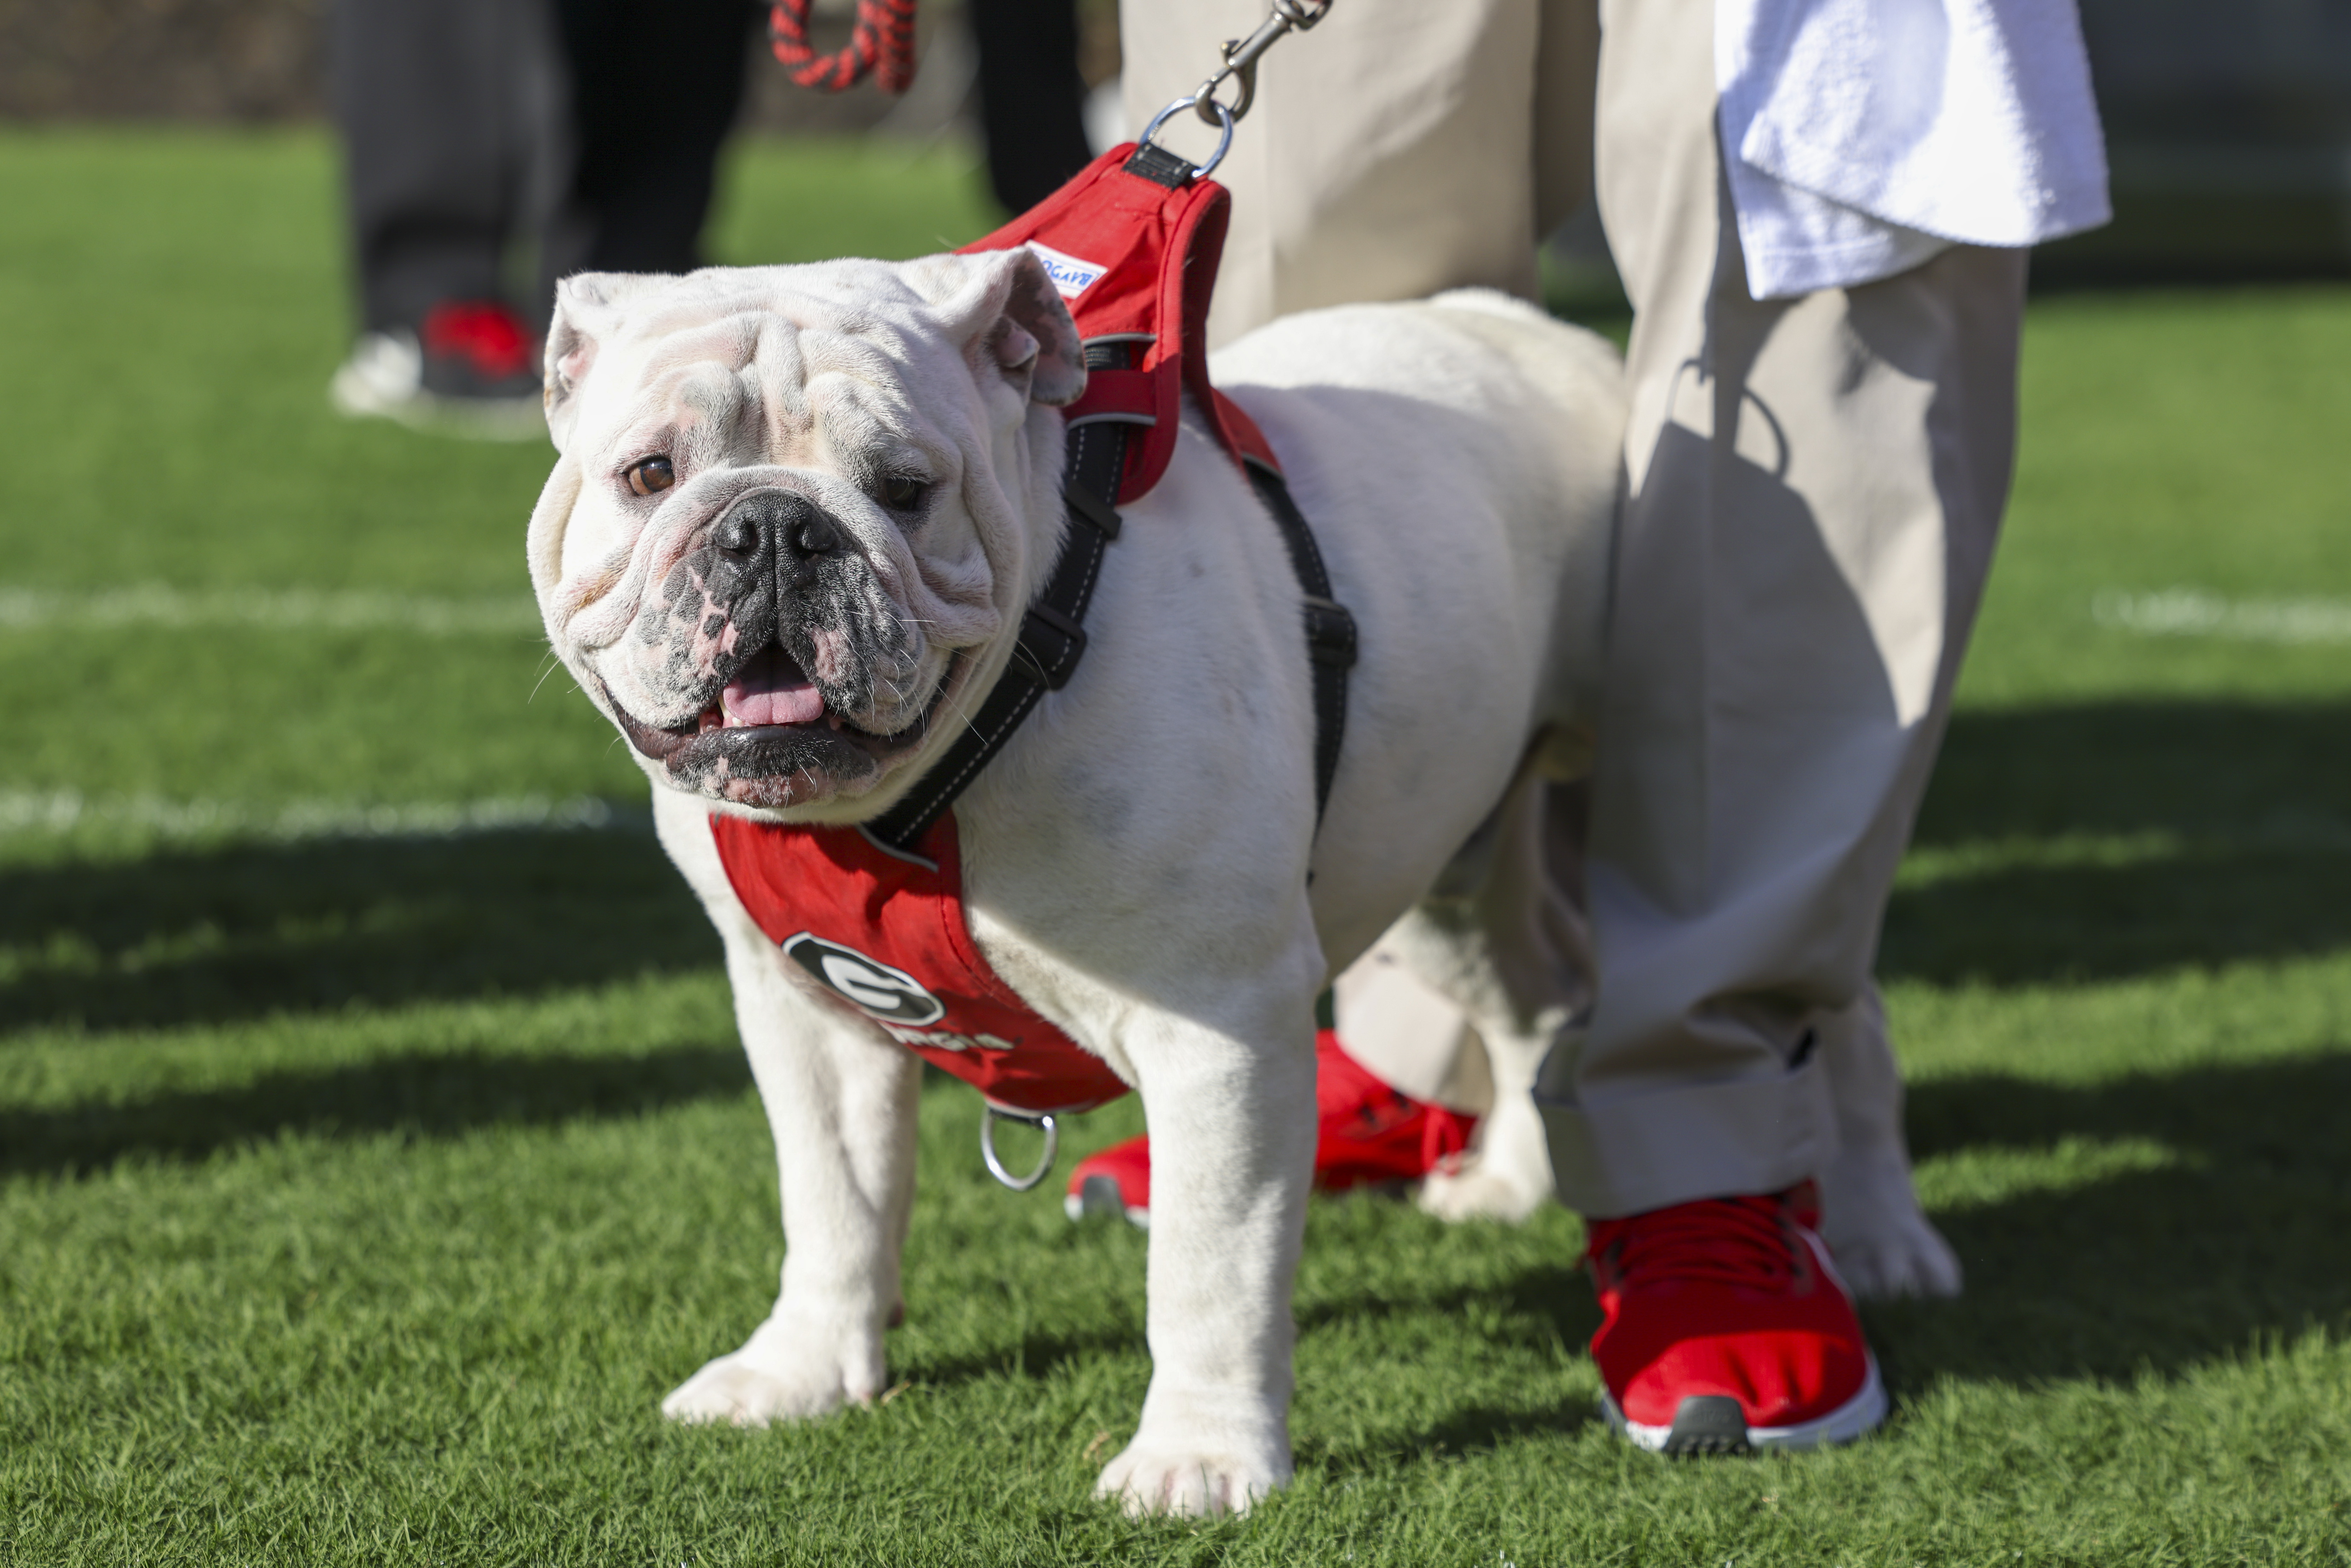 Boom takes over as Georgia's official mascot